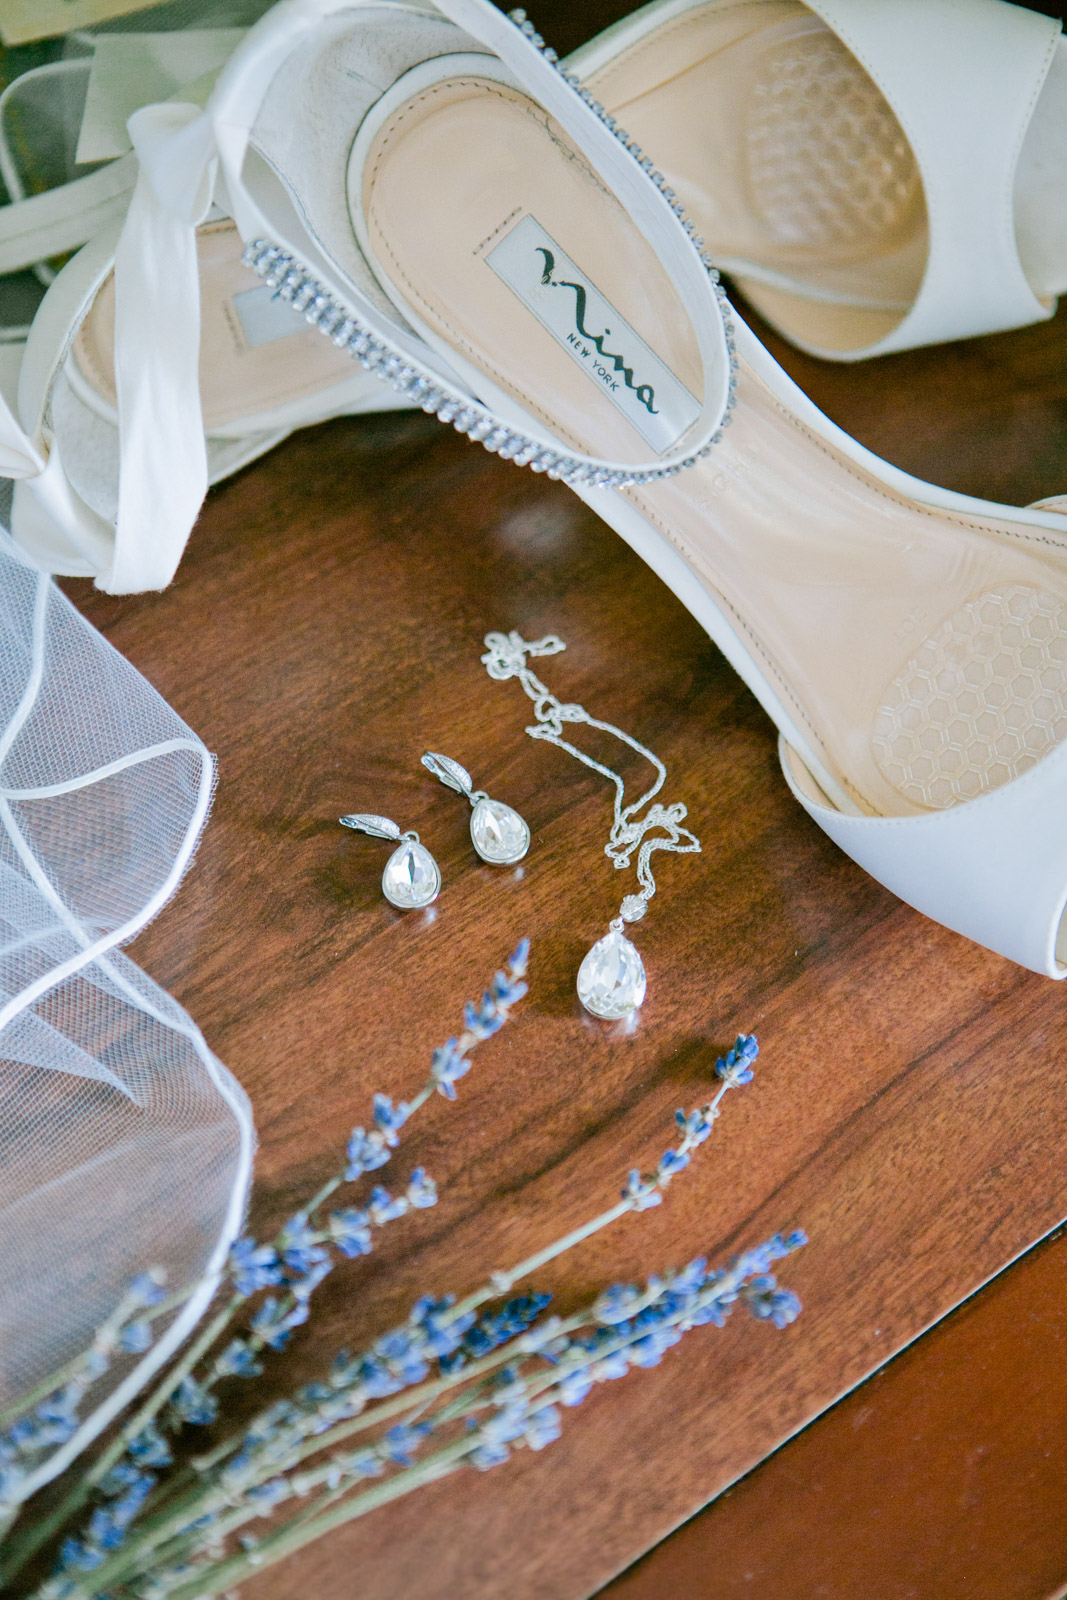 mina new york shoes lay next to a pair of fine diamond earrings and a delicate wedding veil